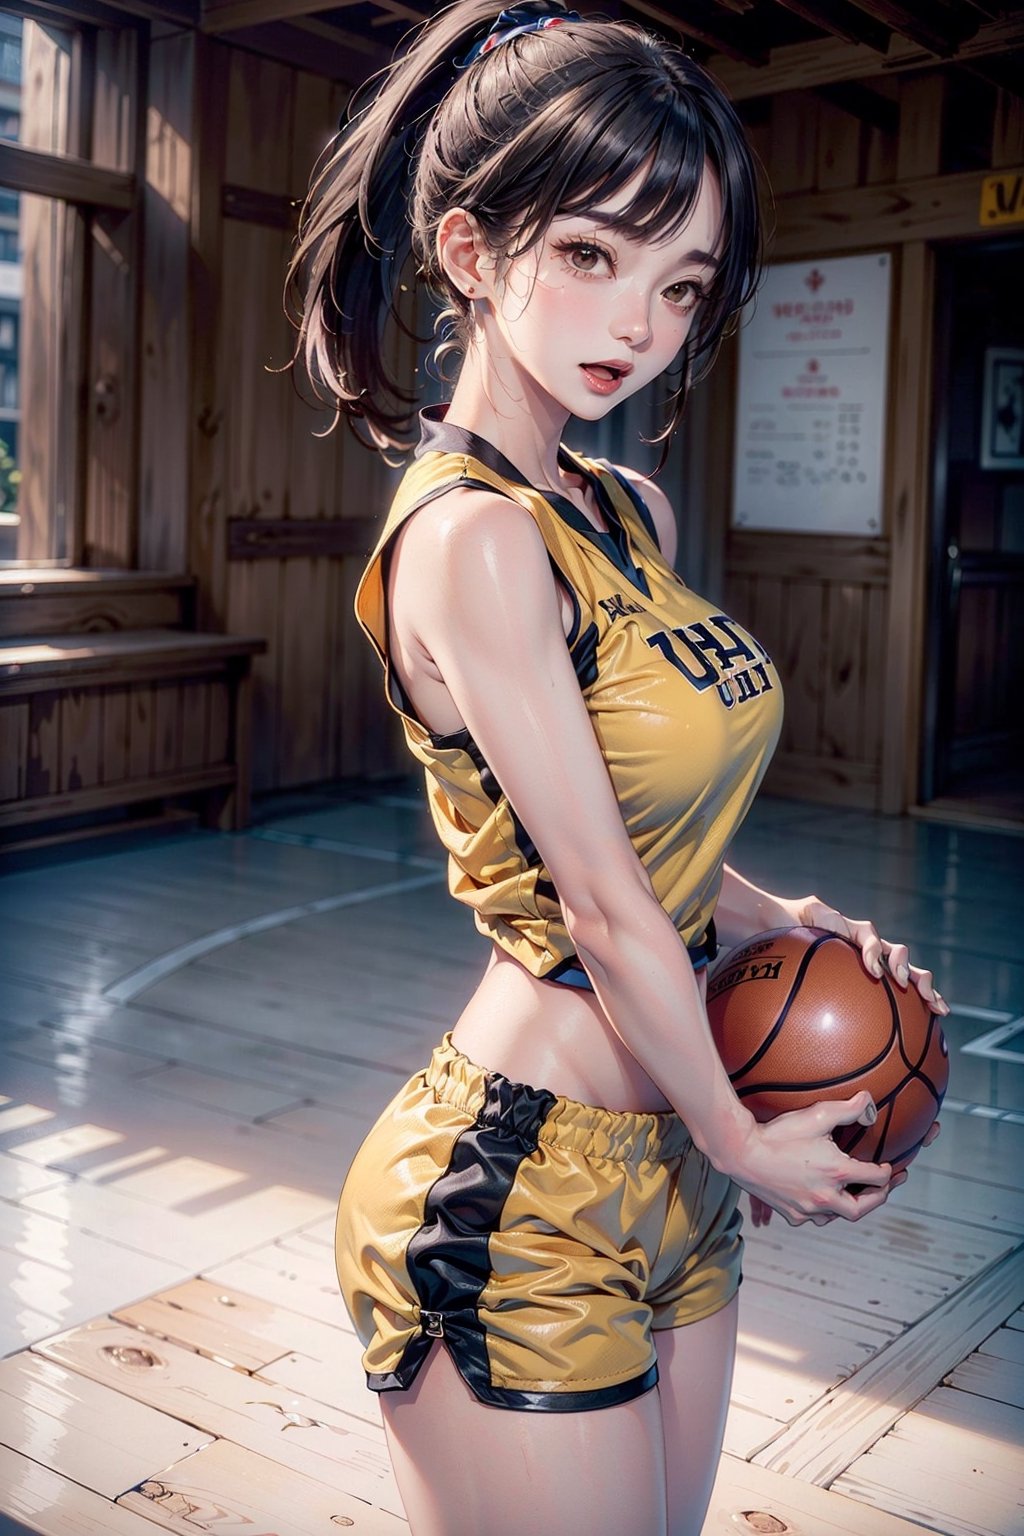 (((1ponytail hair girl:1.3, solo))), (a extremely pretty and beautiful milf:1.3), (22 years old: 1.1), (pointing at you:1.3), (stylish basketball posing:1.3), (open stance:1.3), (dribbling:1.3),  at basketball arena, 
break, 
(up-ponytail:1.3), (shiny-black thin hair:1.2), bangs, dark brown eyes, beautiful eyes, princess eyes, bangs, Hair between eyes, short hair:1.3, slender, (gigantic breasts:1.3, sagging breasts:1.3, disproportionate breasts;1.3), (thin waist: 1.3), (detailed beautiful girl: 1.4), Parted lips, Red lips, full-make-up face, (shiny skin), ((Perfect Female Body)), (upper body Image:1.3), Perfect Anatomy, Perfect Proportions, (most beautiful Asian actress face:1.3, extremely cute and beautiful Korean idol face:1.3), (seductive emotion:1.3), (blowjob face:1.3, open mouth:1.3), (4fingers and thumb:1.3), (perfect ratio human hands:1.3), 
BREAK, 
(wearing a yellow basketball unifrom:1.3), (sports shorts:1.3), (basketball shoes:1.3), detailed clothes, 
BREAK, 
a basketball arema, basketball, baseketball goal, audience, player, coach, 
BREAK, 
(Realistic, Photorealistic: 1.37), (Masterpiece, Best Quality: 1.2), (Ultra High Resolution: 1.2), (RAW Photo: 1.2), (Sharp Focus: 1.3), (Face Focus: 1.2), (Ultra Detailed CG Unified 8k Wallpaper: 1.2), (Beautiful Skin: 1.2), (pale Skin:1.3), (Hyper Sharp Focus: 1.5), (Ultra Sharp Focus: 1.5), (Beautiful pretty face: 1.3), (super detailed background, detail background: 1.3), Ultra Realistic Photo, Hyper Sharp Image, Hyper Detail Image, ,Indoor Grey